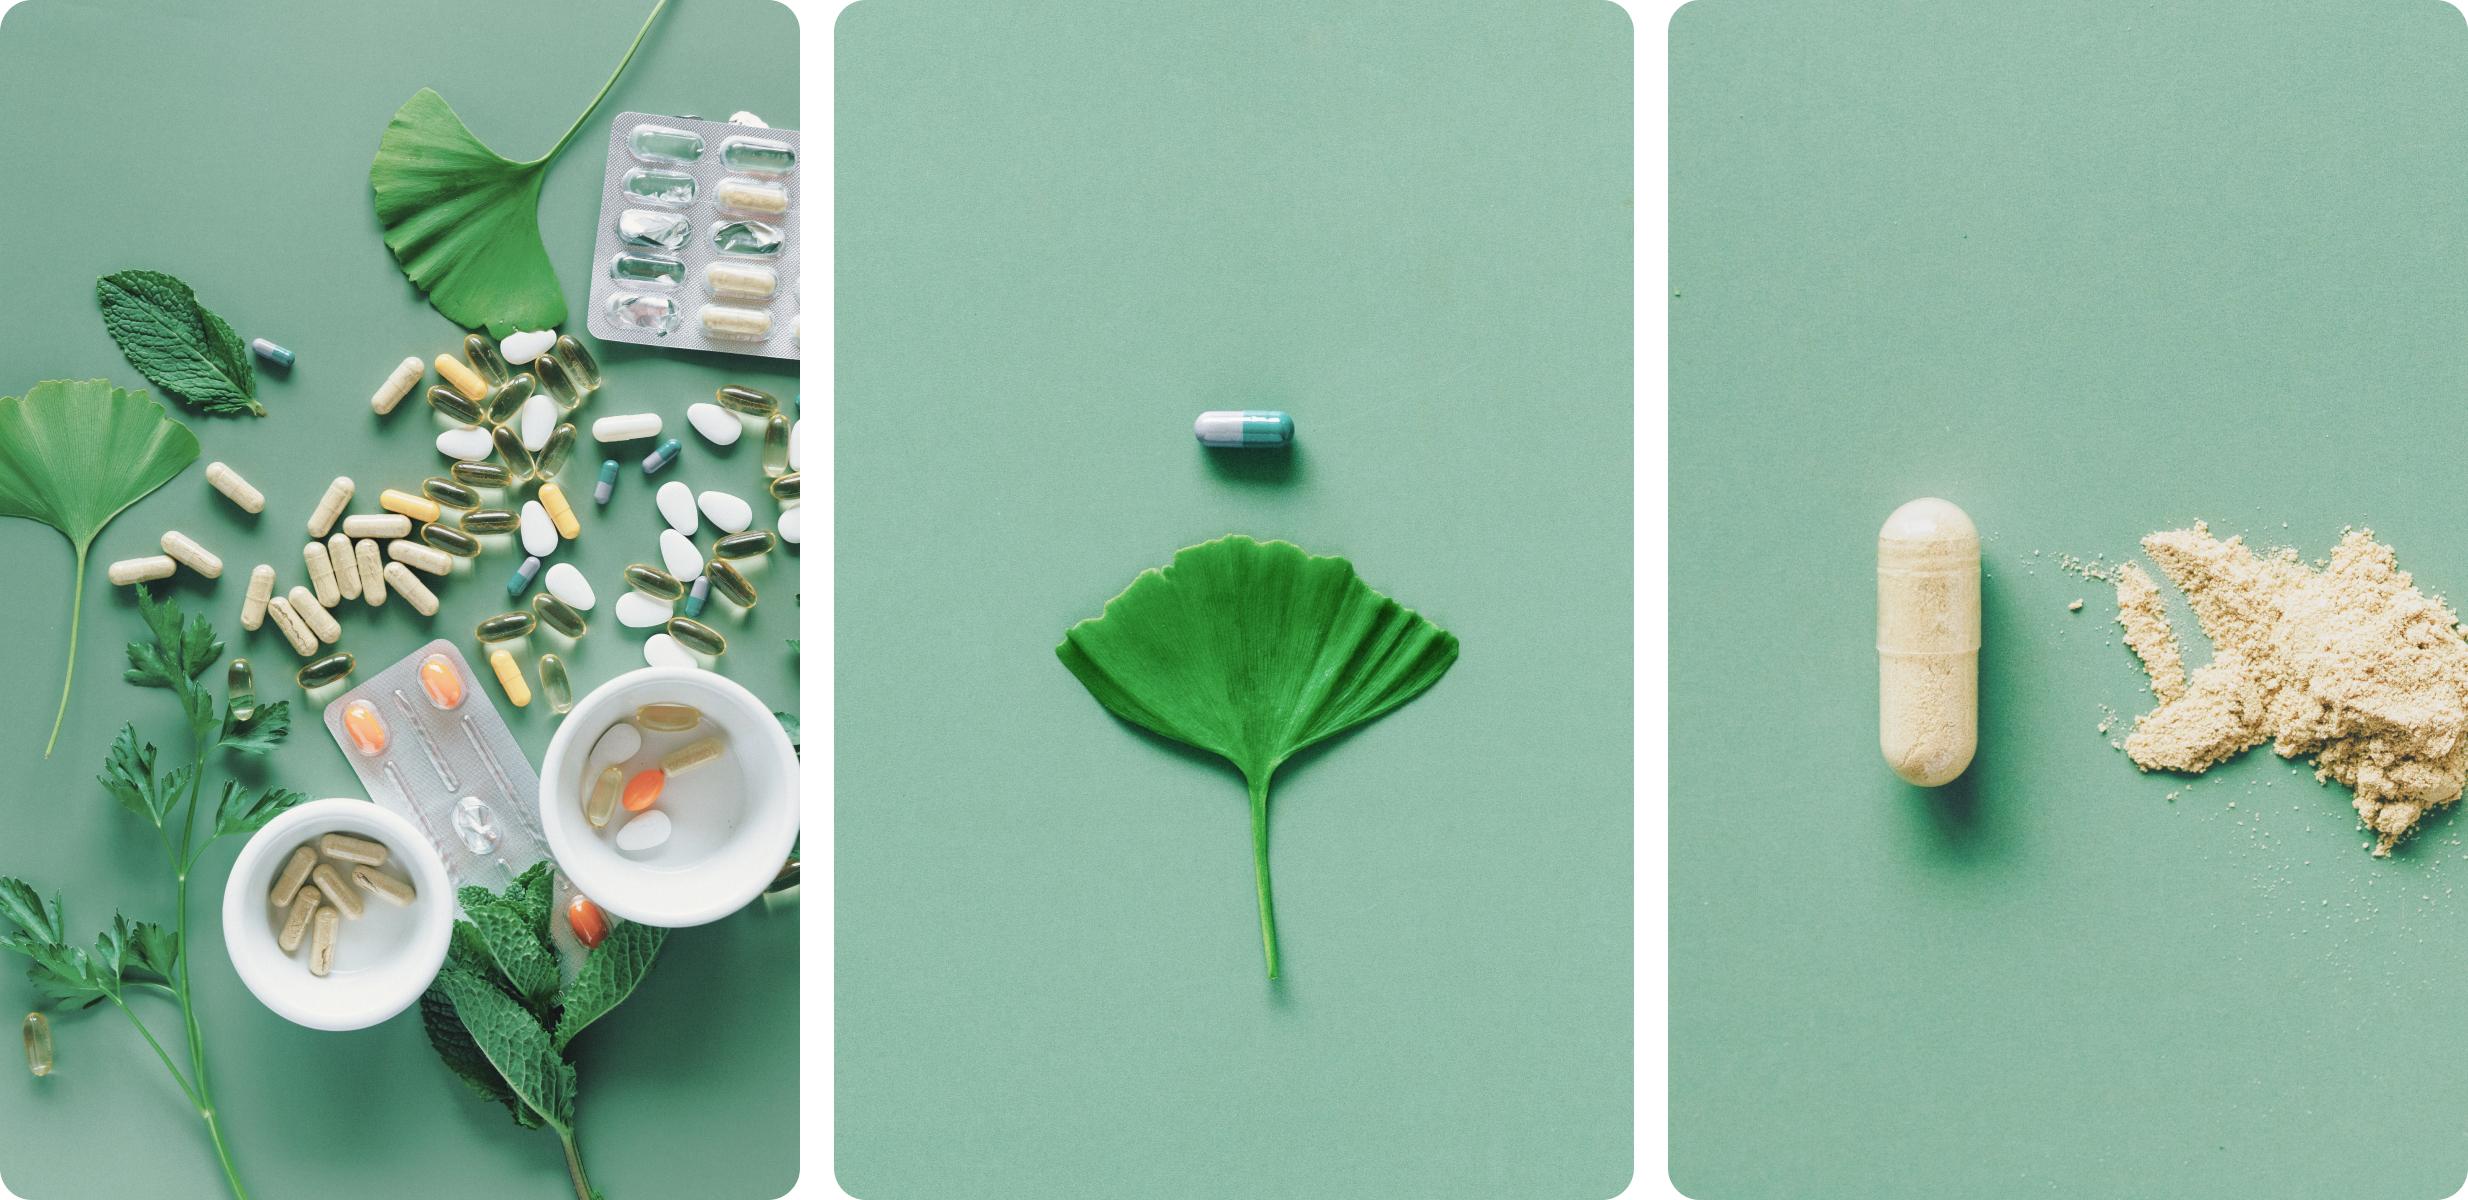 Three images representing supplements with a mix of herbal plants